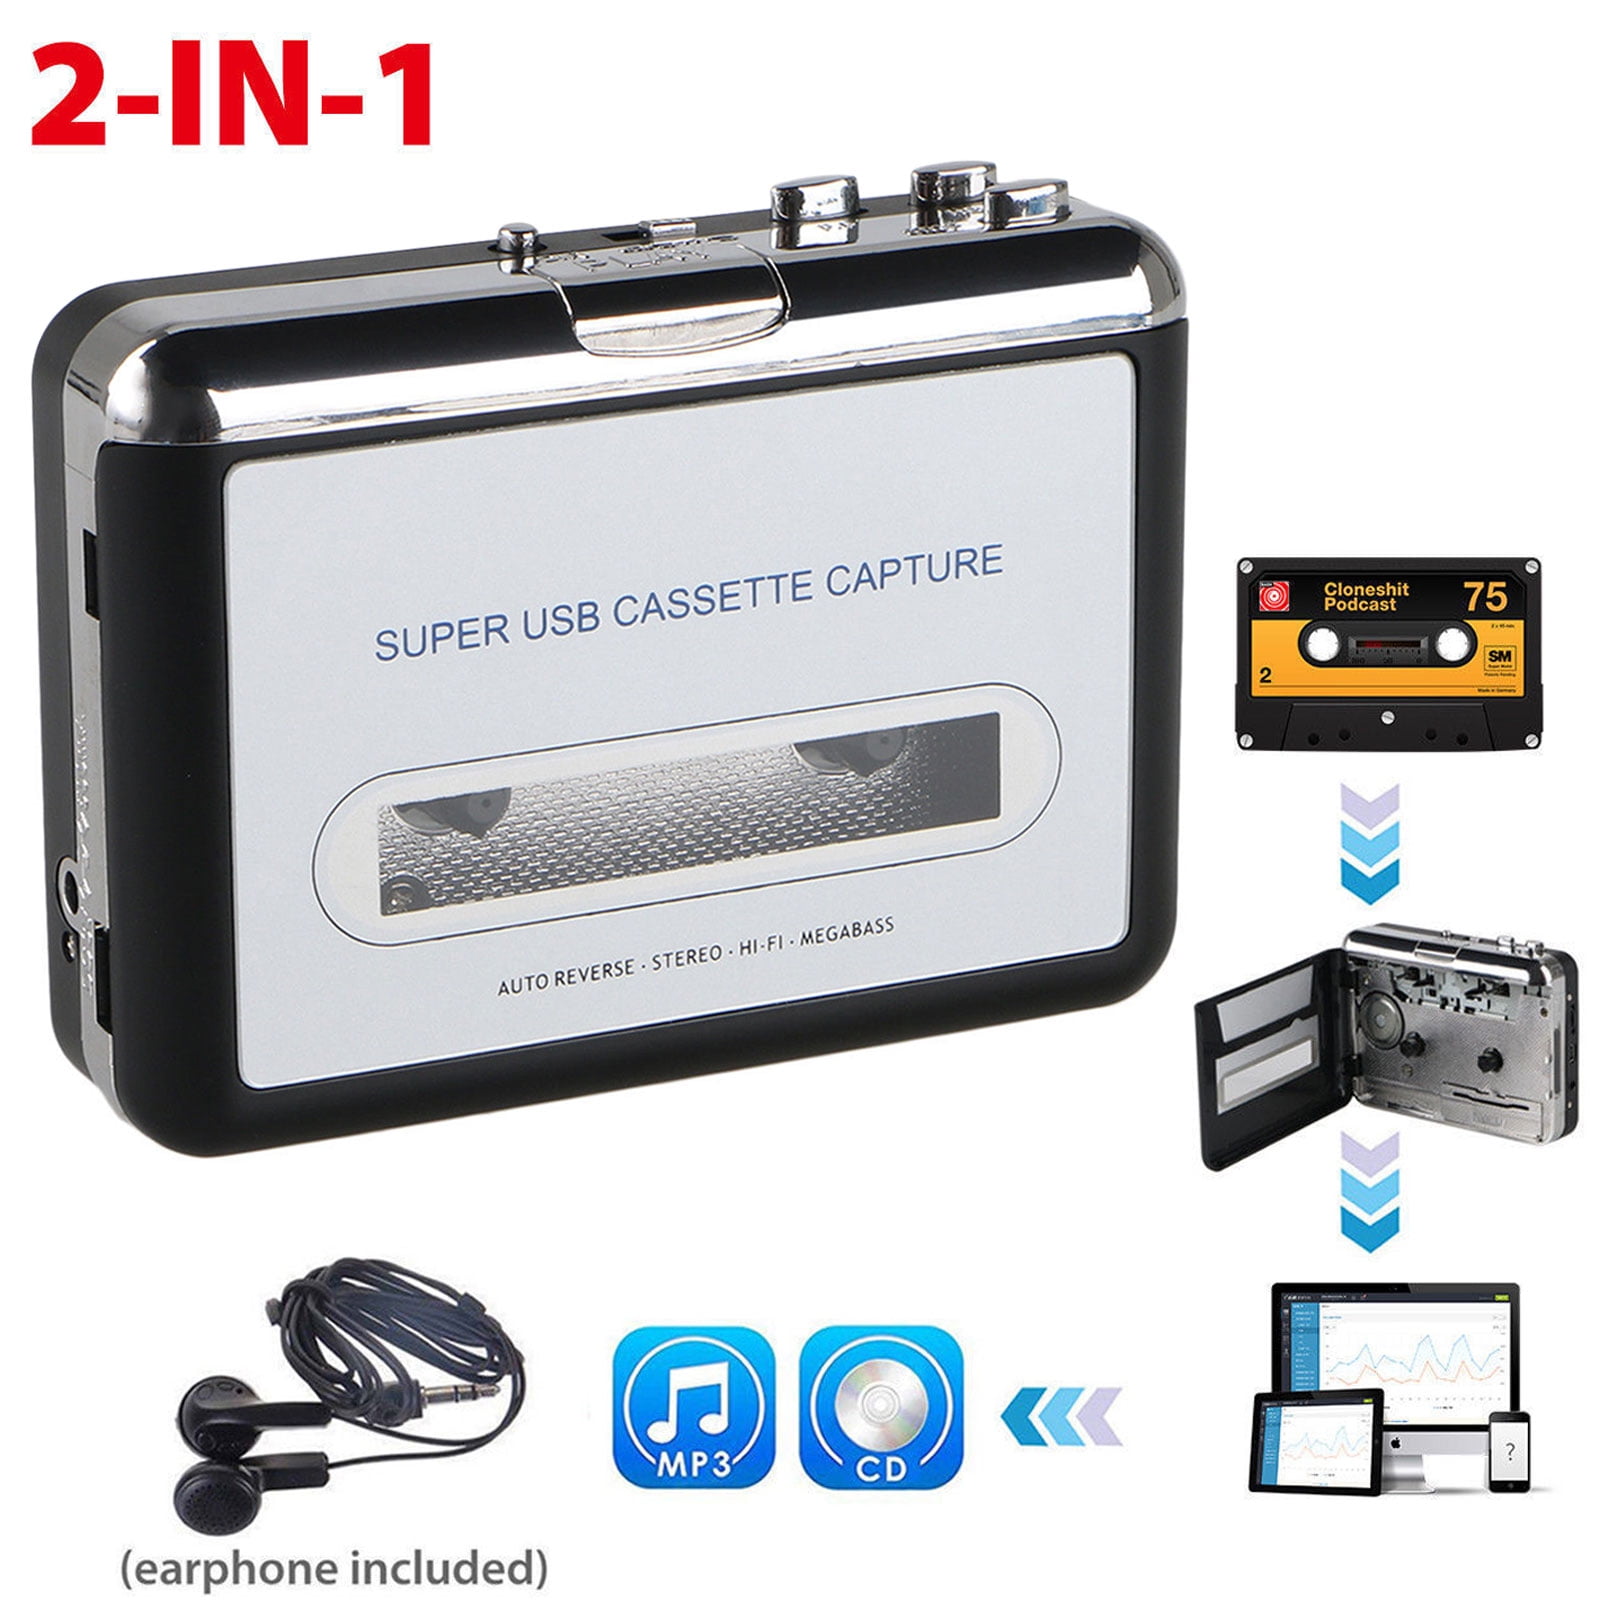 Rybozen Cassette Player Portable Converter Recorder Convert Tapes to Digital MP3 Save into USB Flash Drive/ No PC Required Black